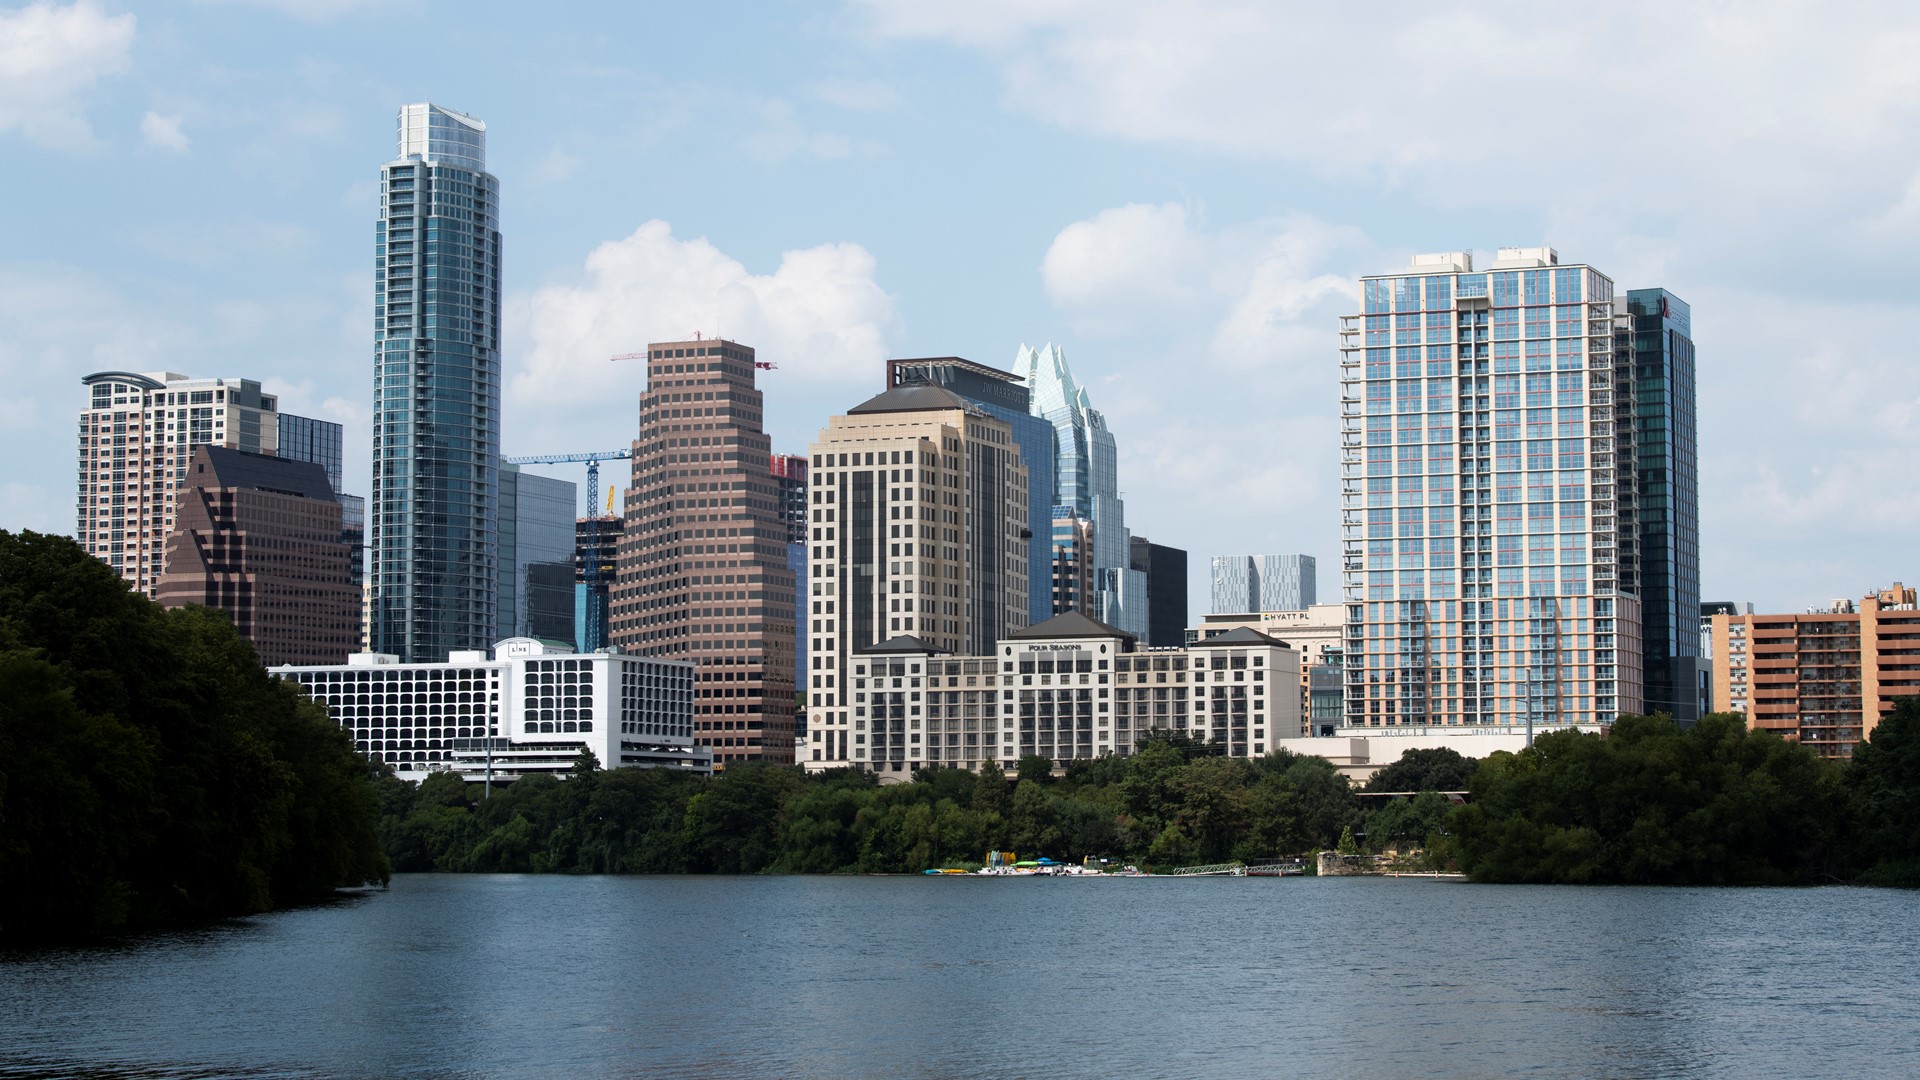 City demographer shows where Austin, Texas, is growing